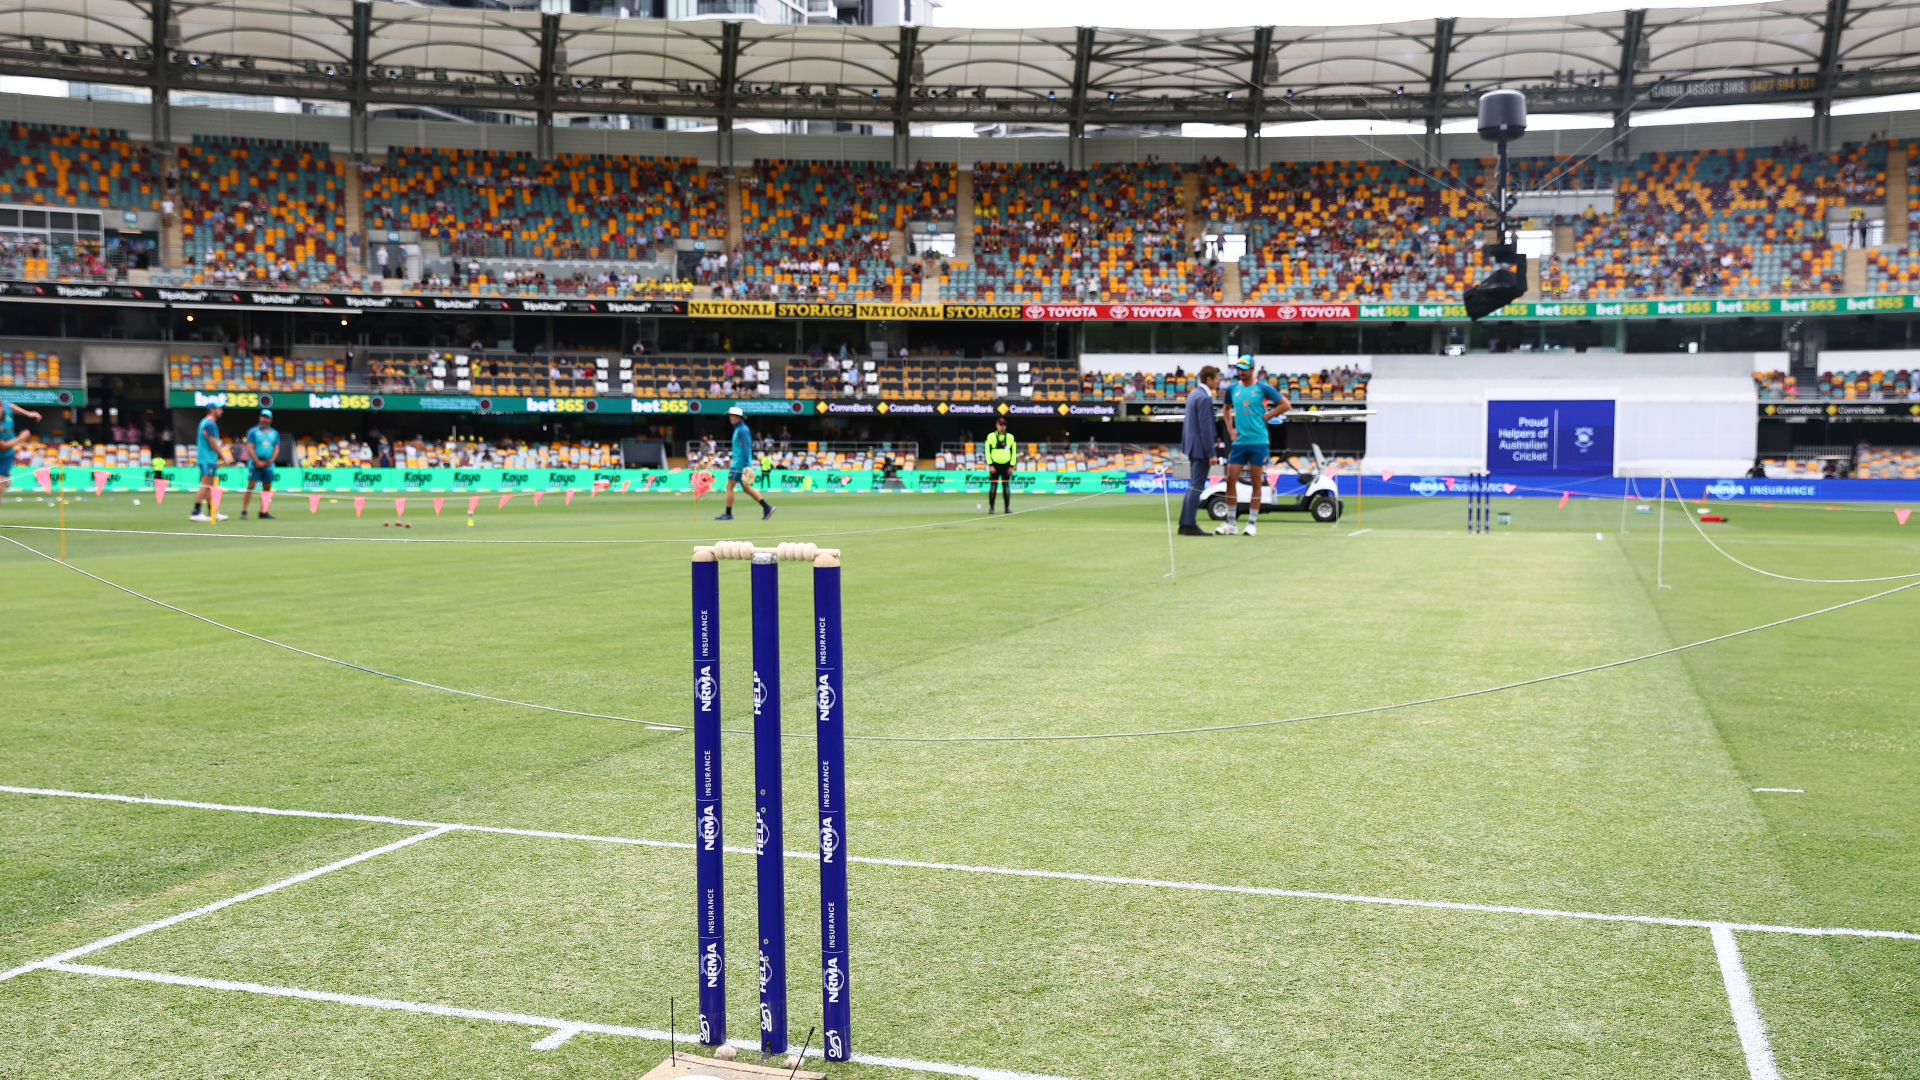 ICC gives Gabba pitch for Australia's win over Proteas 'below average' rating